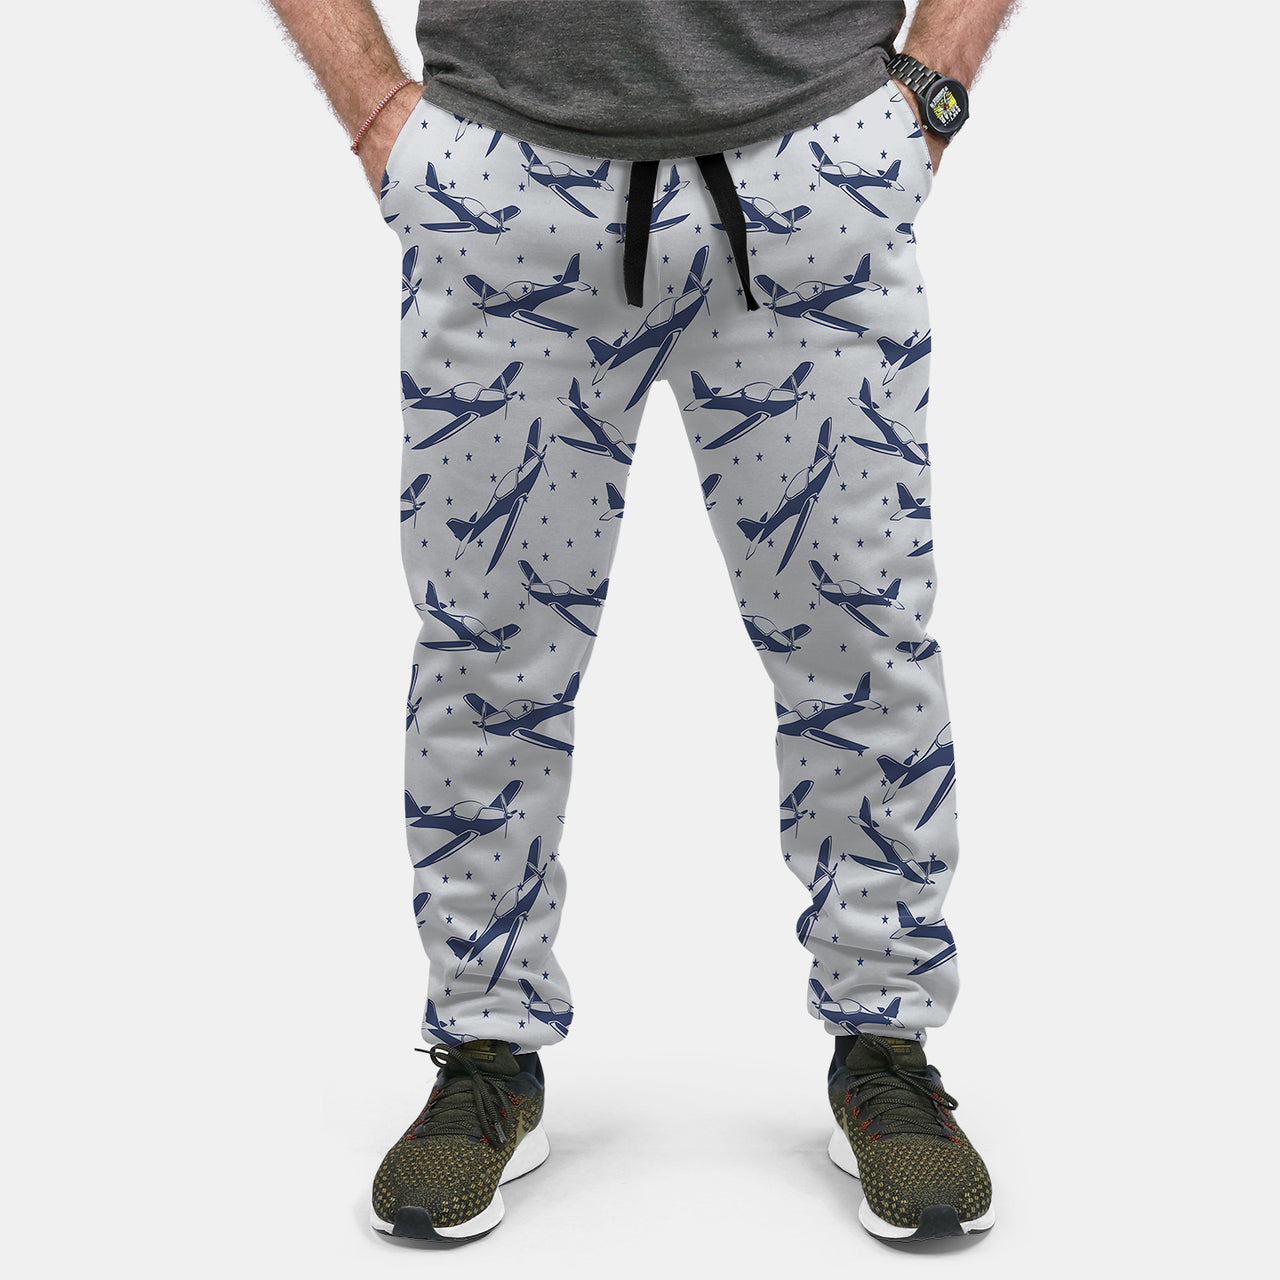 Propellers & Stars Designed Sweat Pants & Trousers